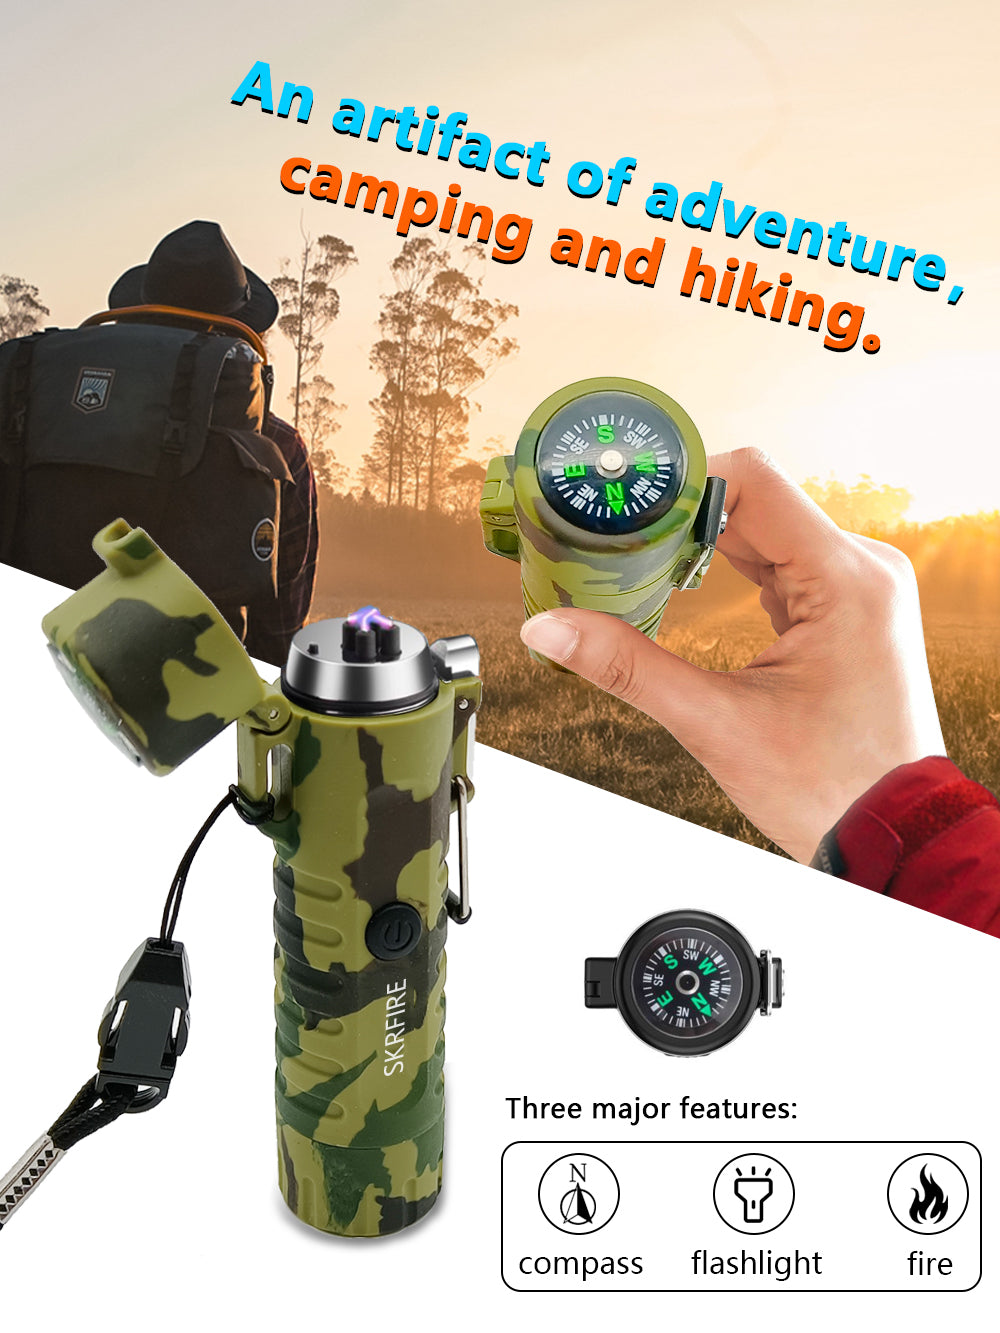 SKRFIRE Waterproof Windproof Outdoor Lighter USB Rechargeable Double Arc Plasma Electric Lighter with Flashlight Compass for Lighting, Camping, Survival, Tactical